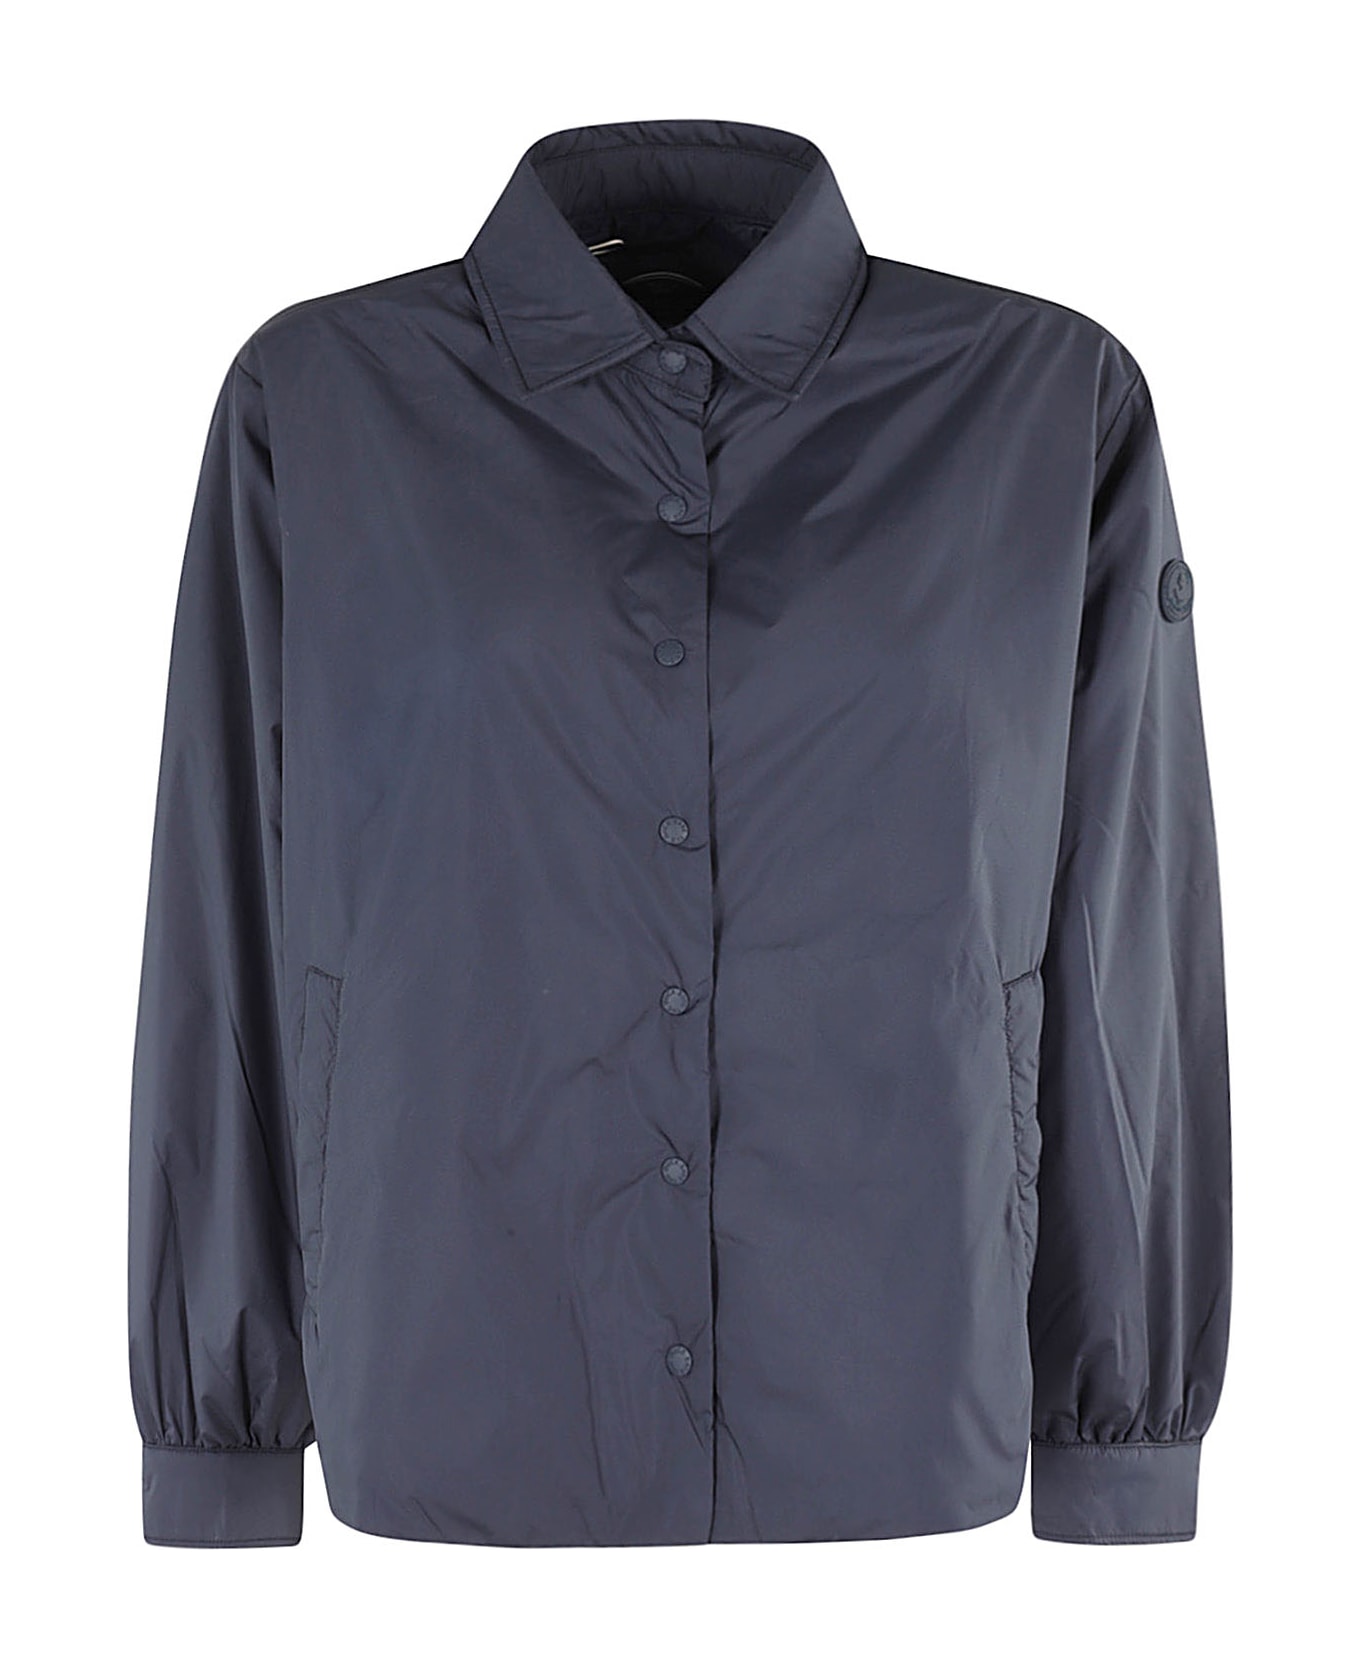 Save the Duck Elka - Navy Blue シャツ